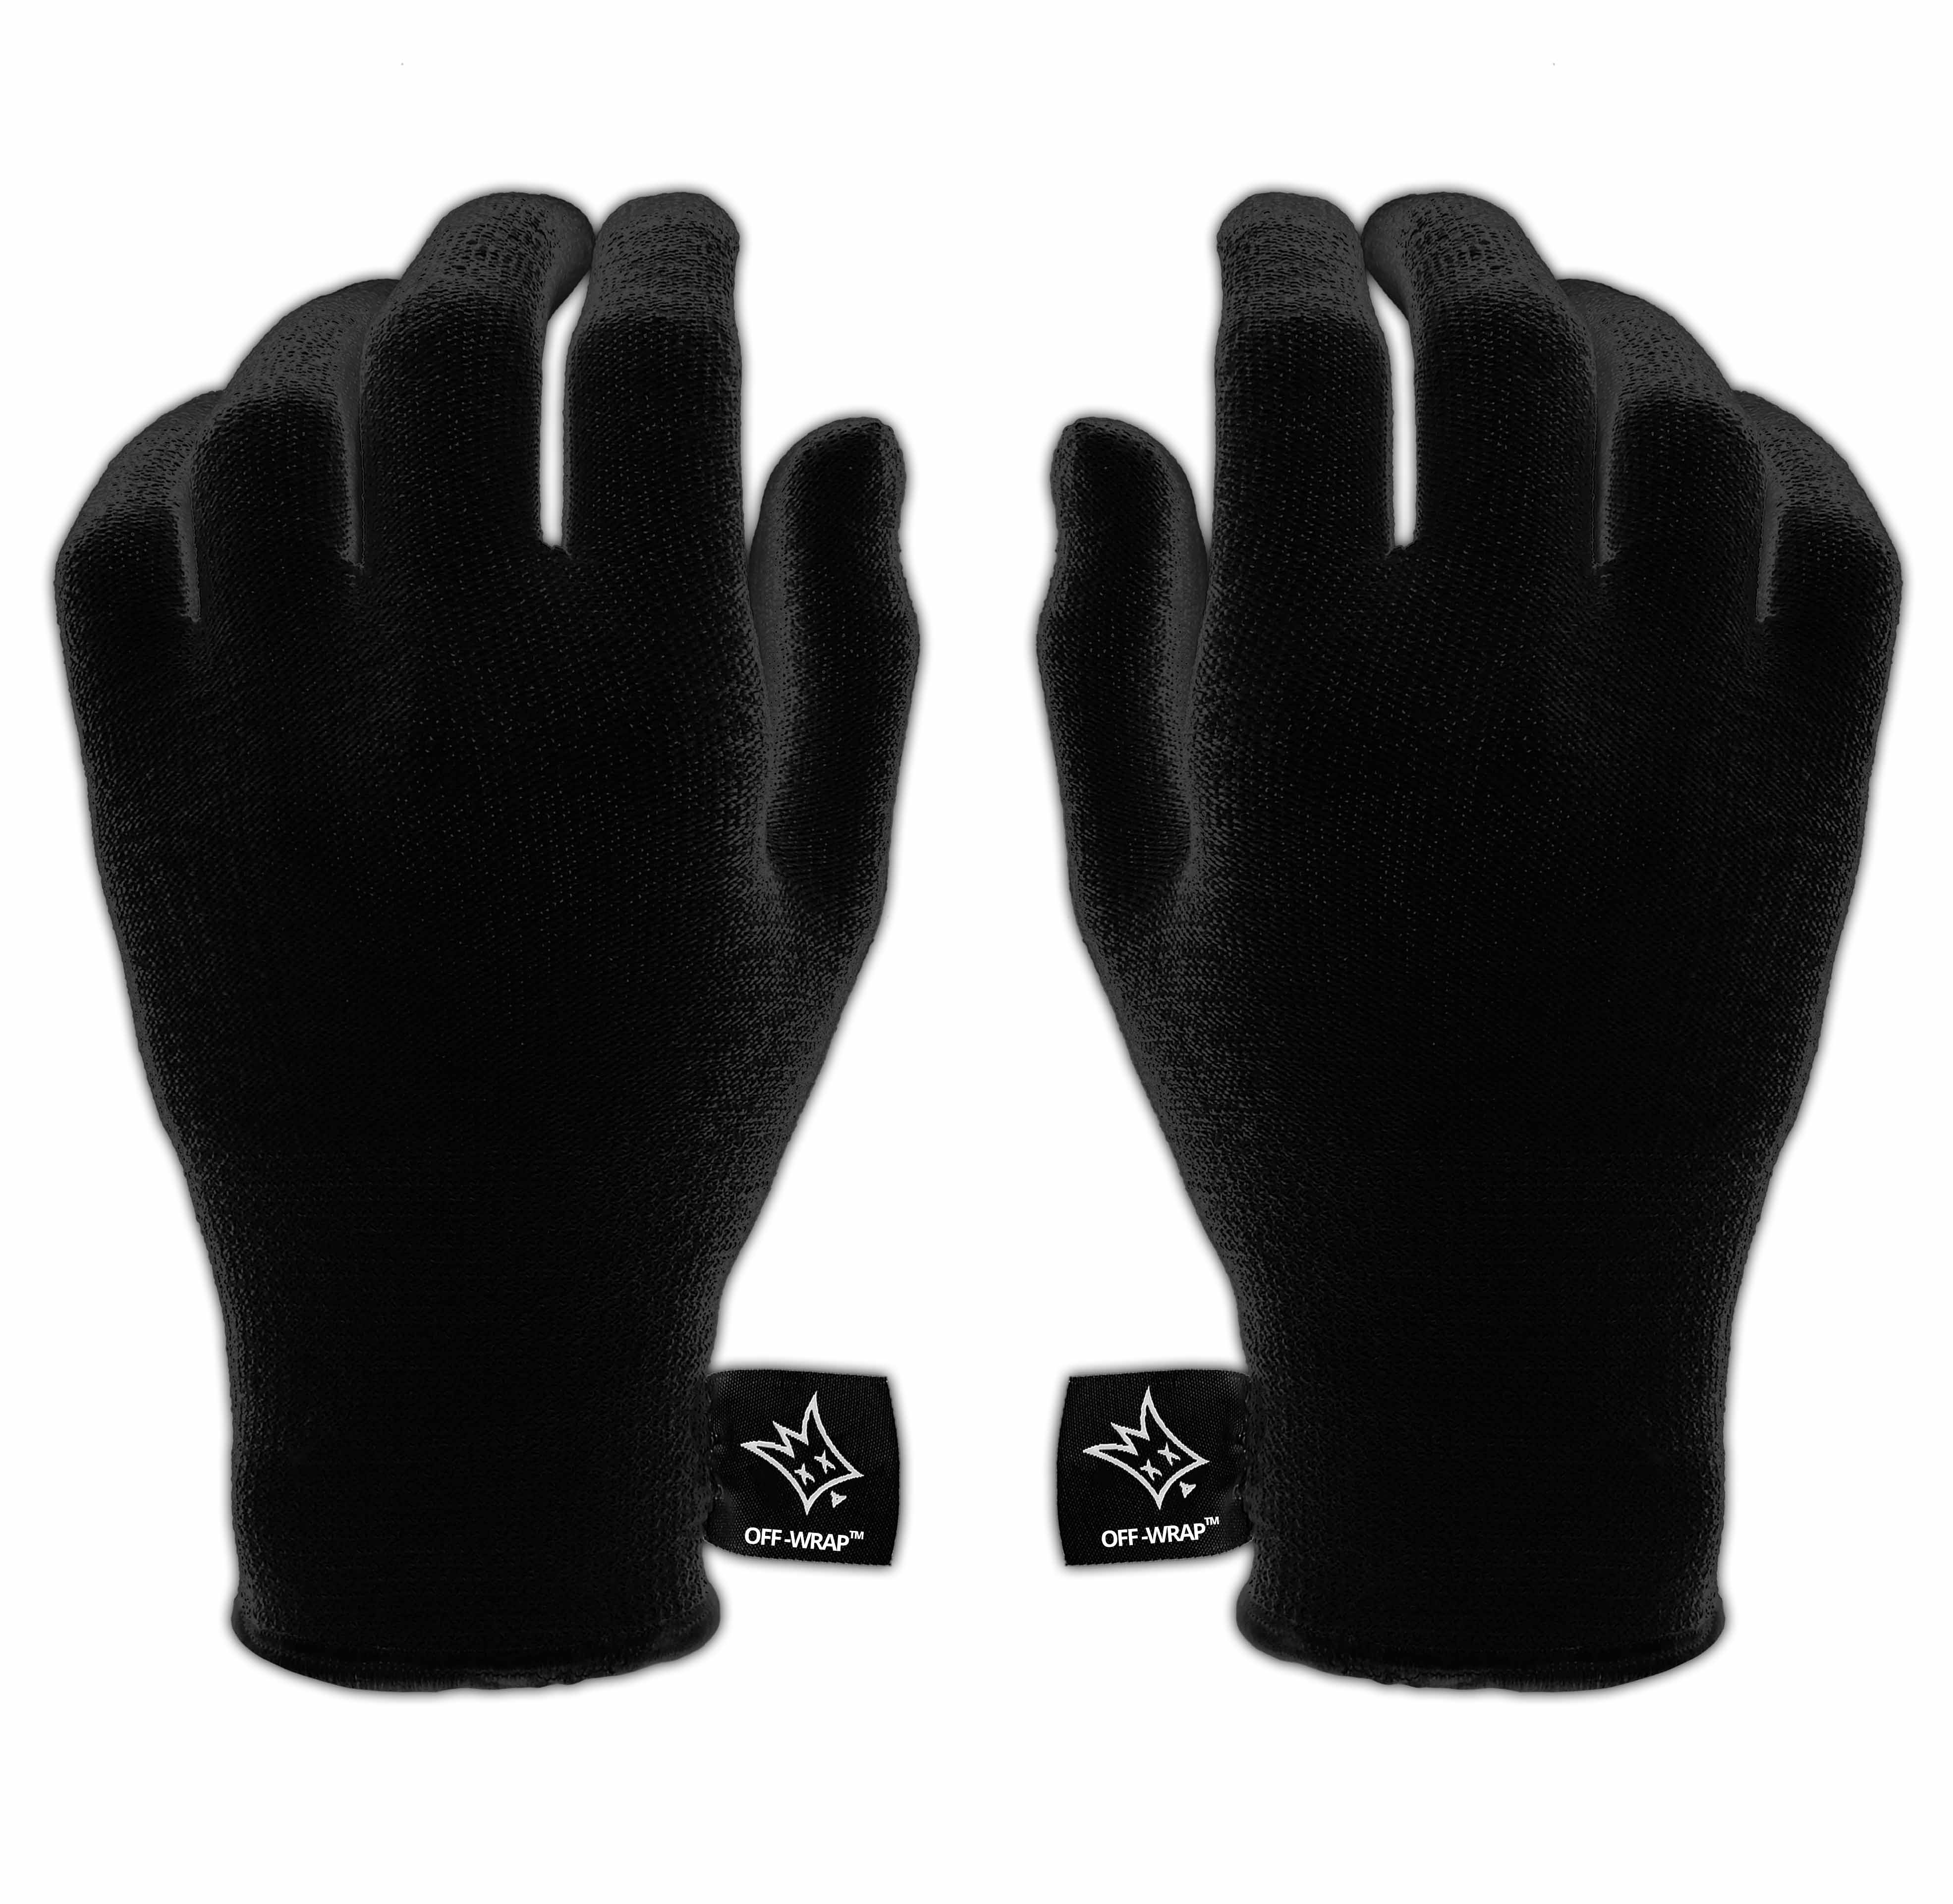 off wrap gloves small